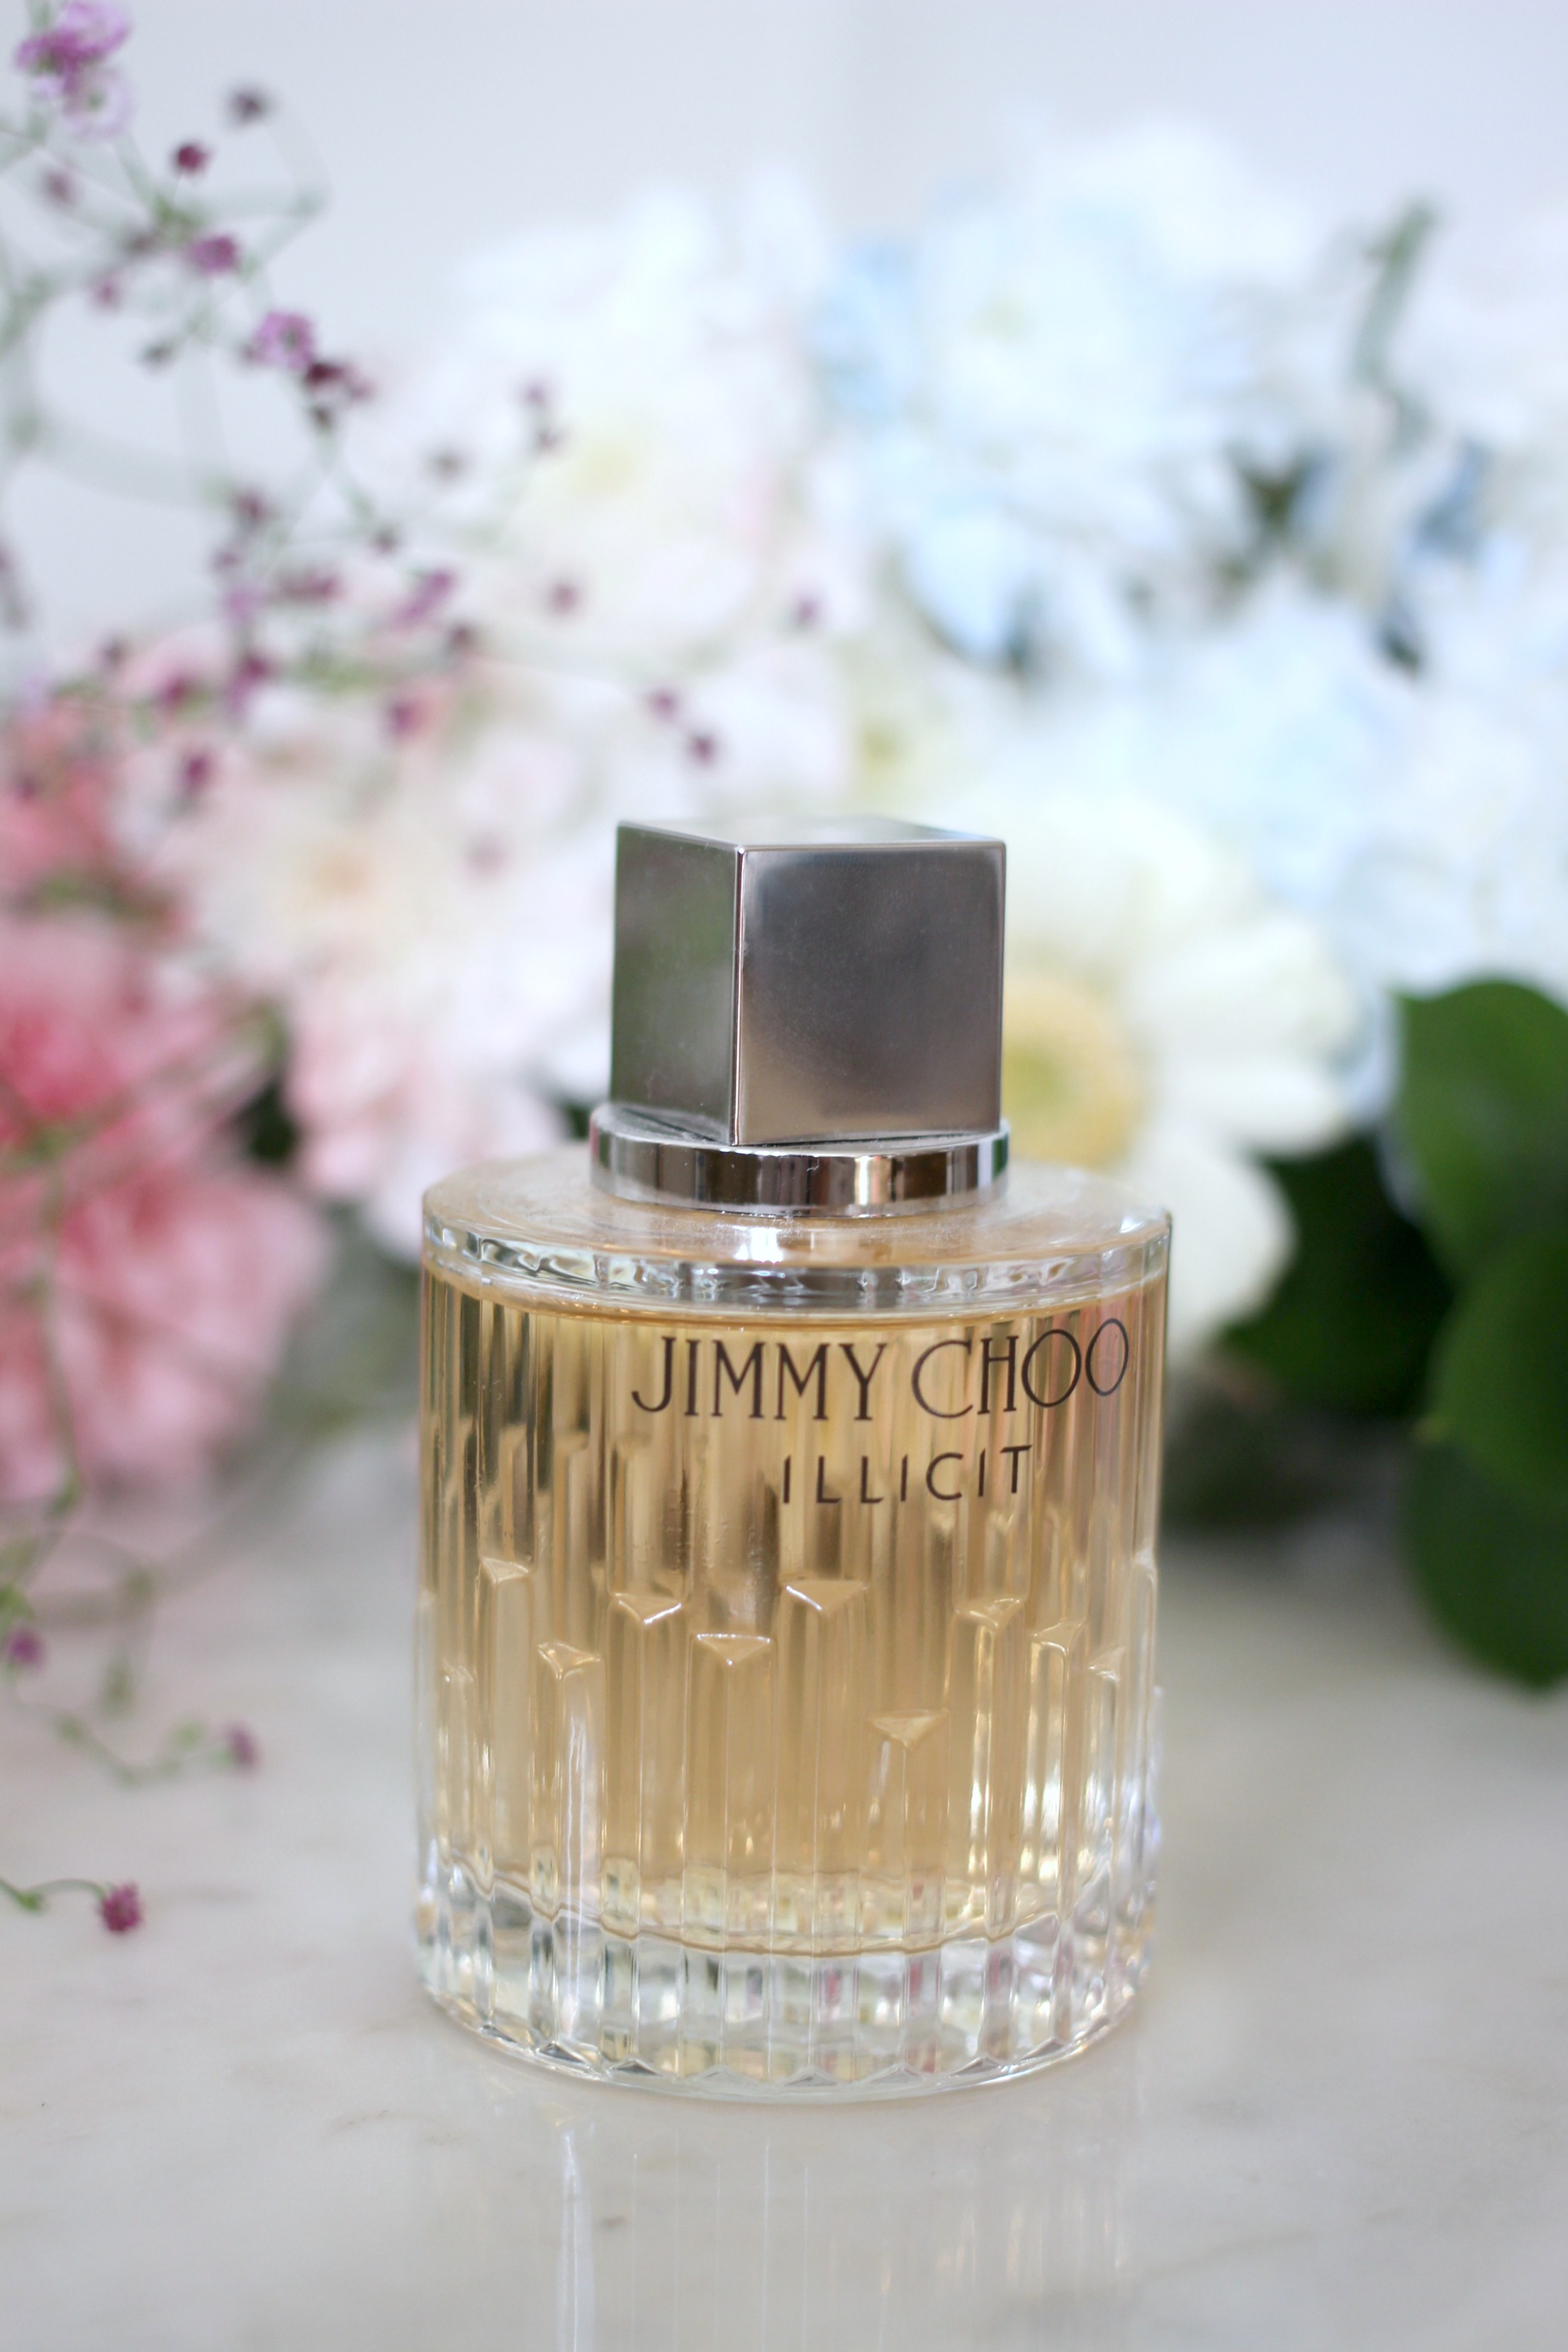 Finding your Fragrance Soulmate - Fashion Mumblr Perfume Jimmy Choo Illicit